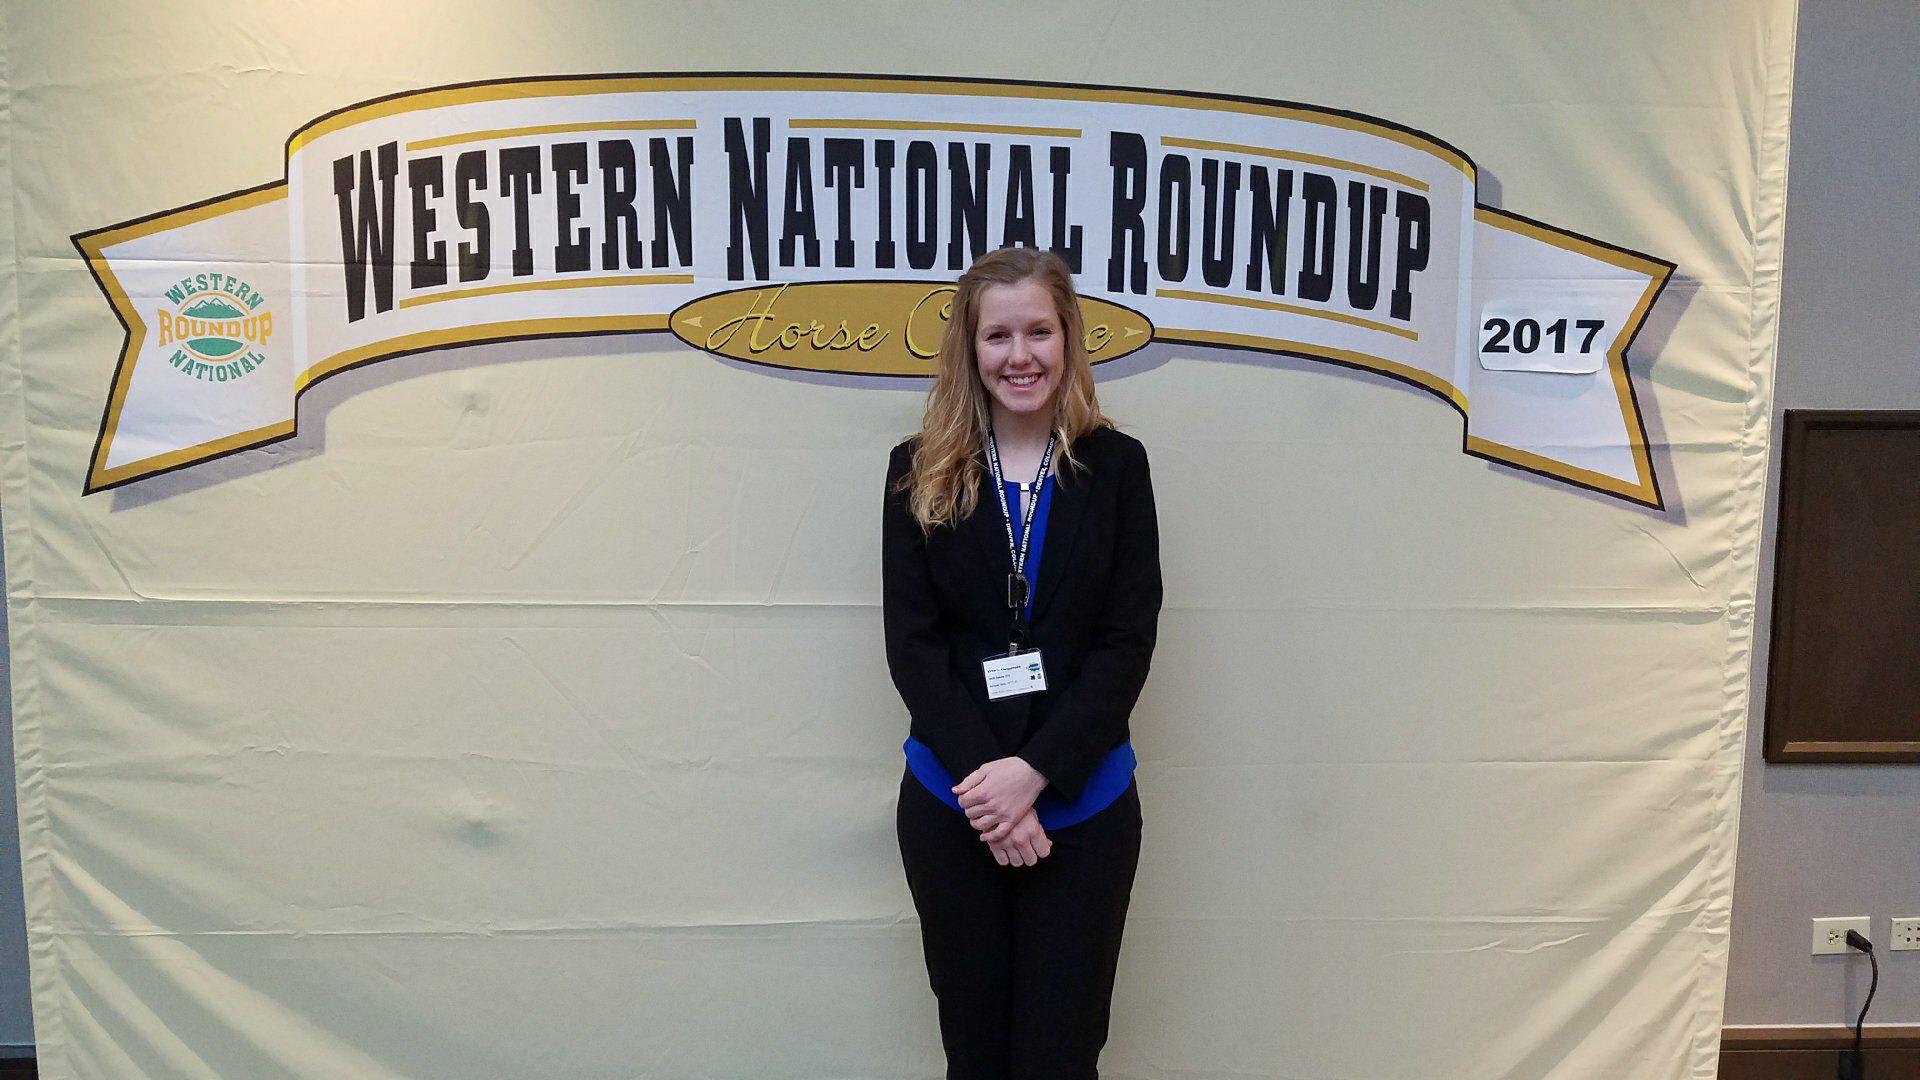 Victoria Christensen took sixth place in horse public speaking at the Western National Roundup. (Photo courtesy of Western National Roundup)